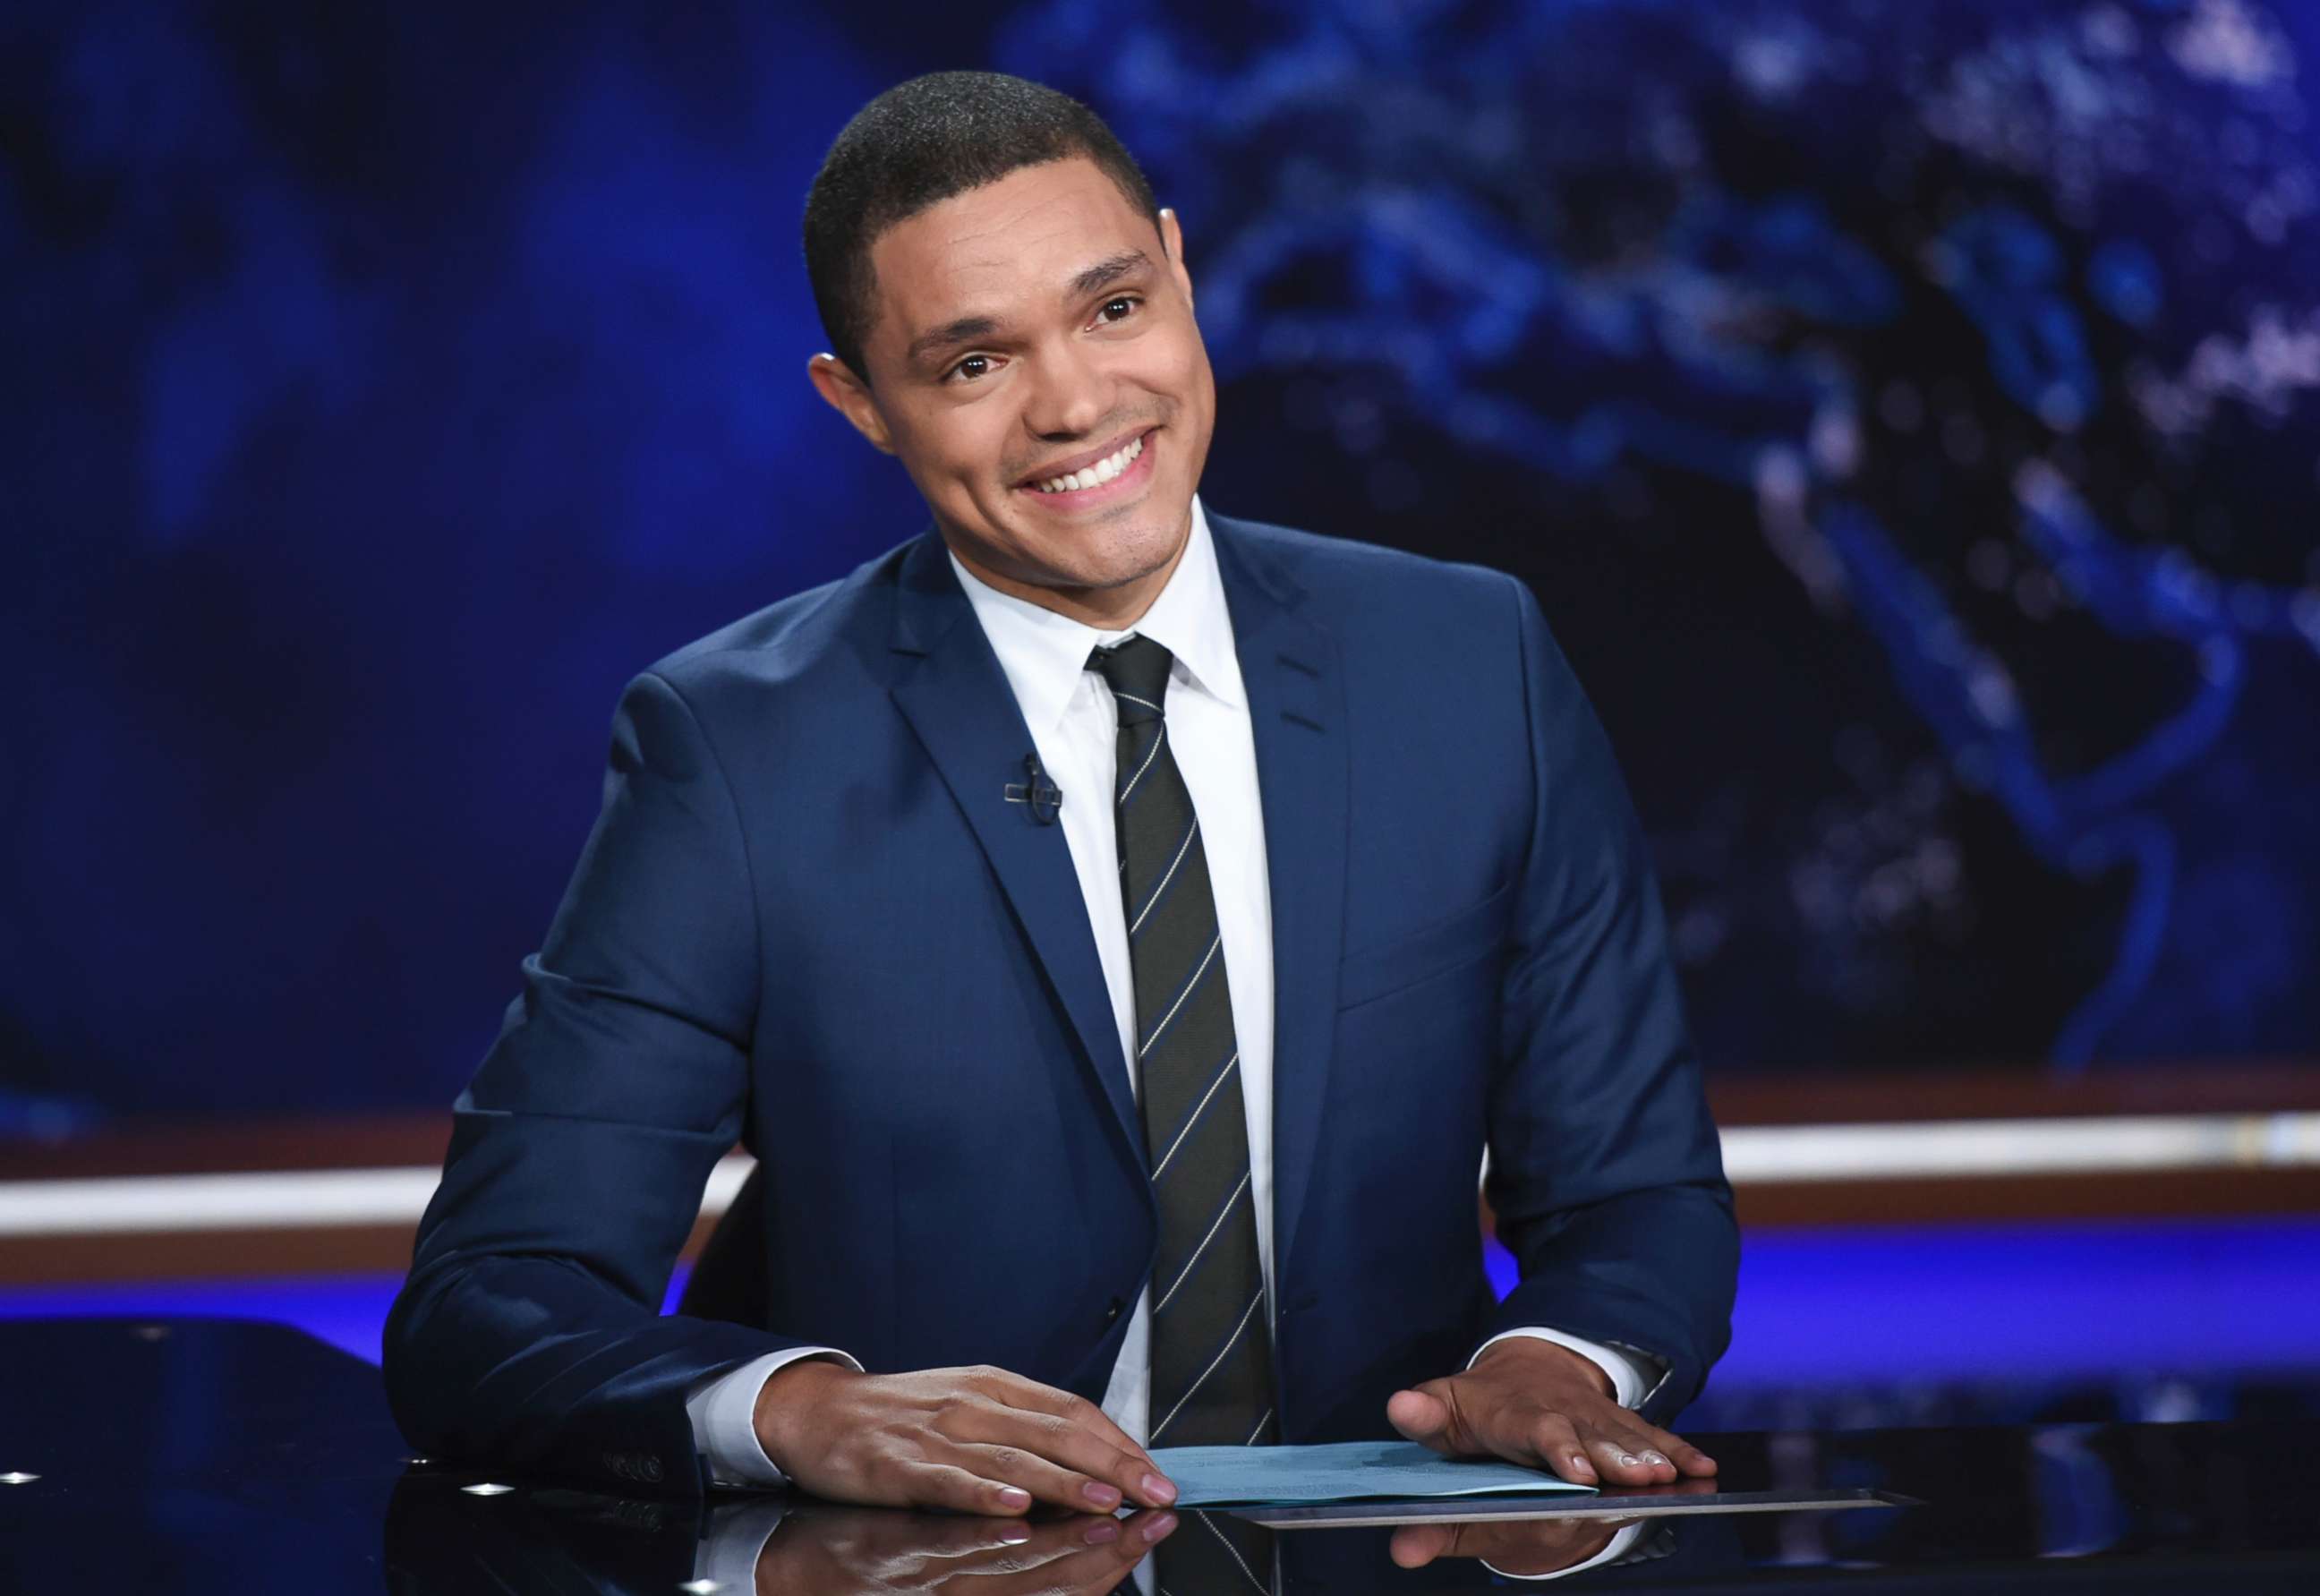 PHOTO: In this Sept. 29, 2015, file photo, Trevor Noah appears during a taping of "The Daily Show," on Comedy Central, in New York City.